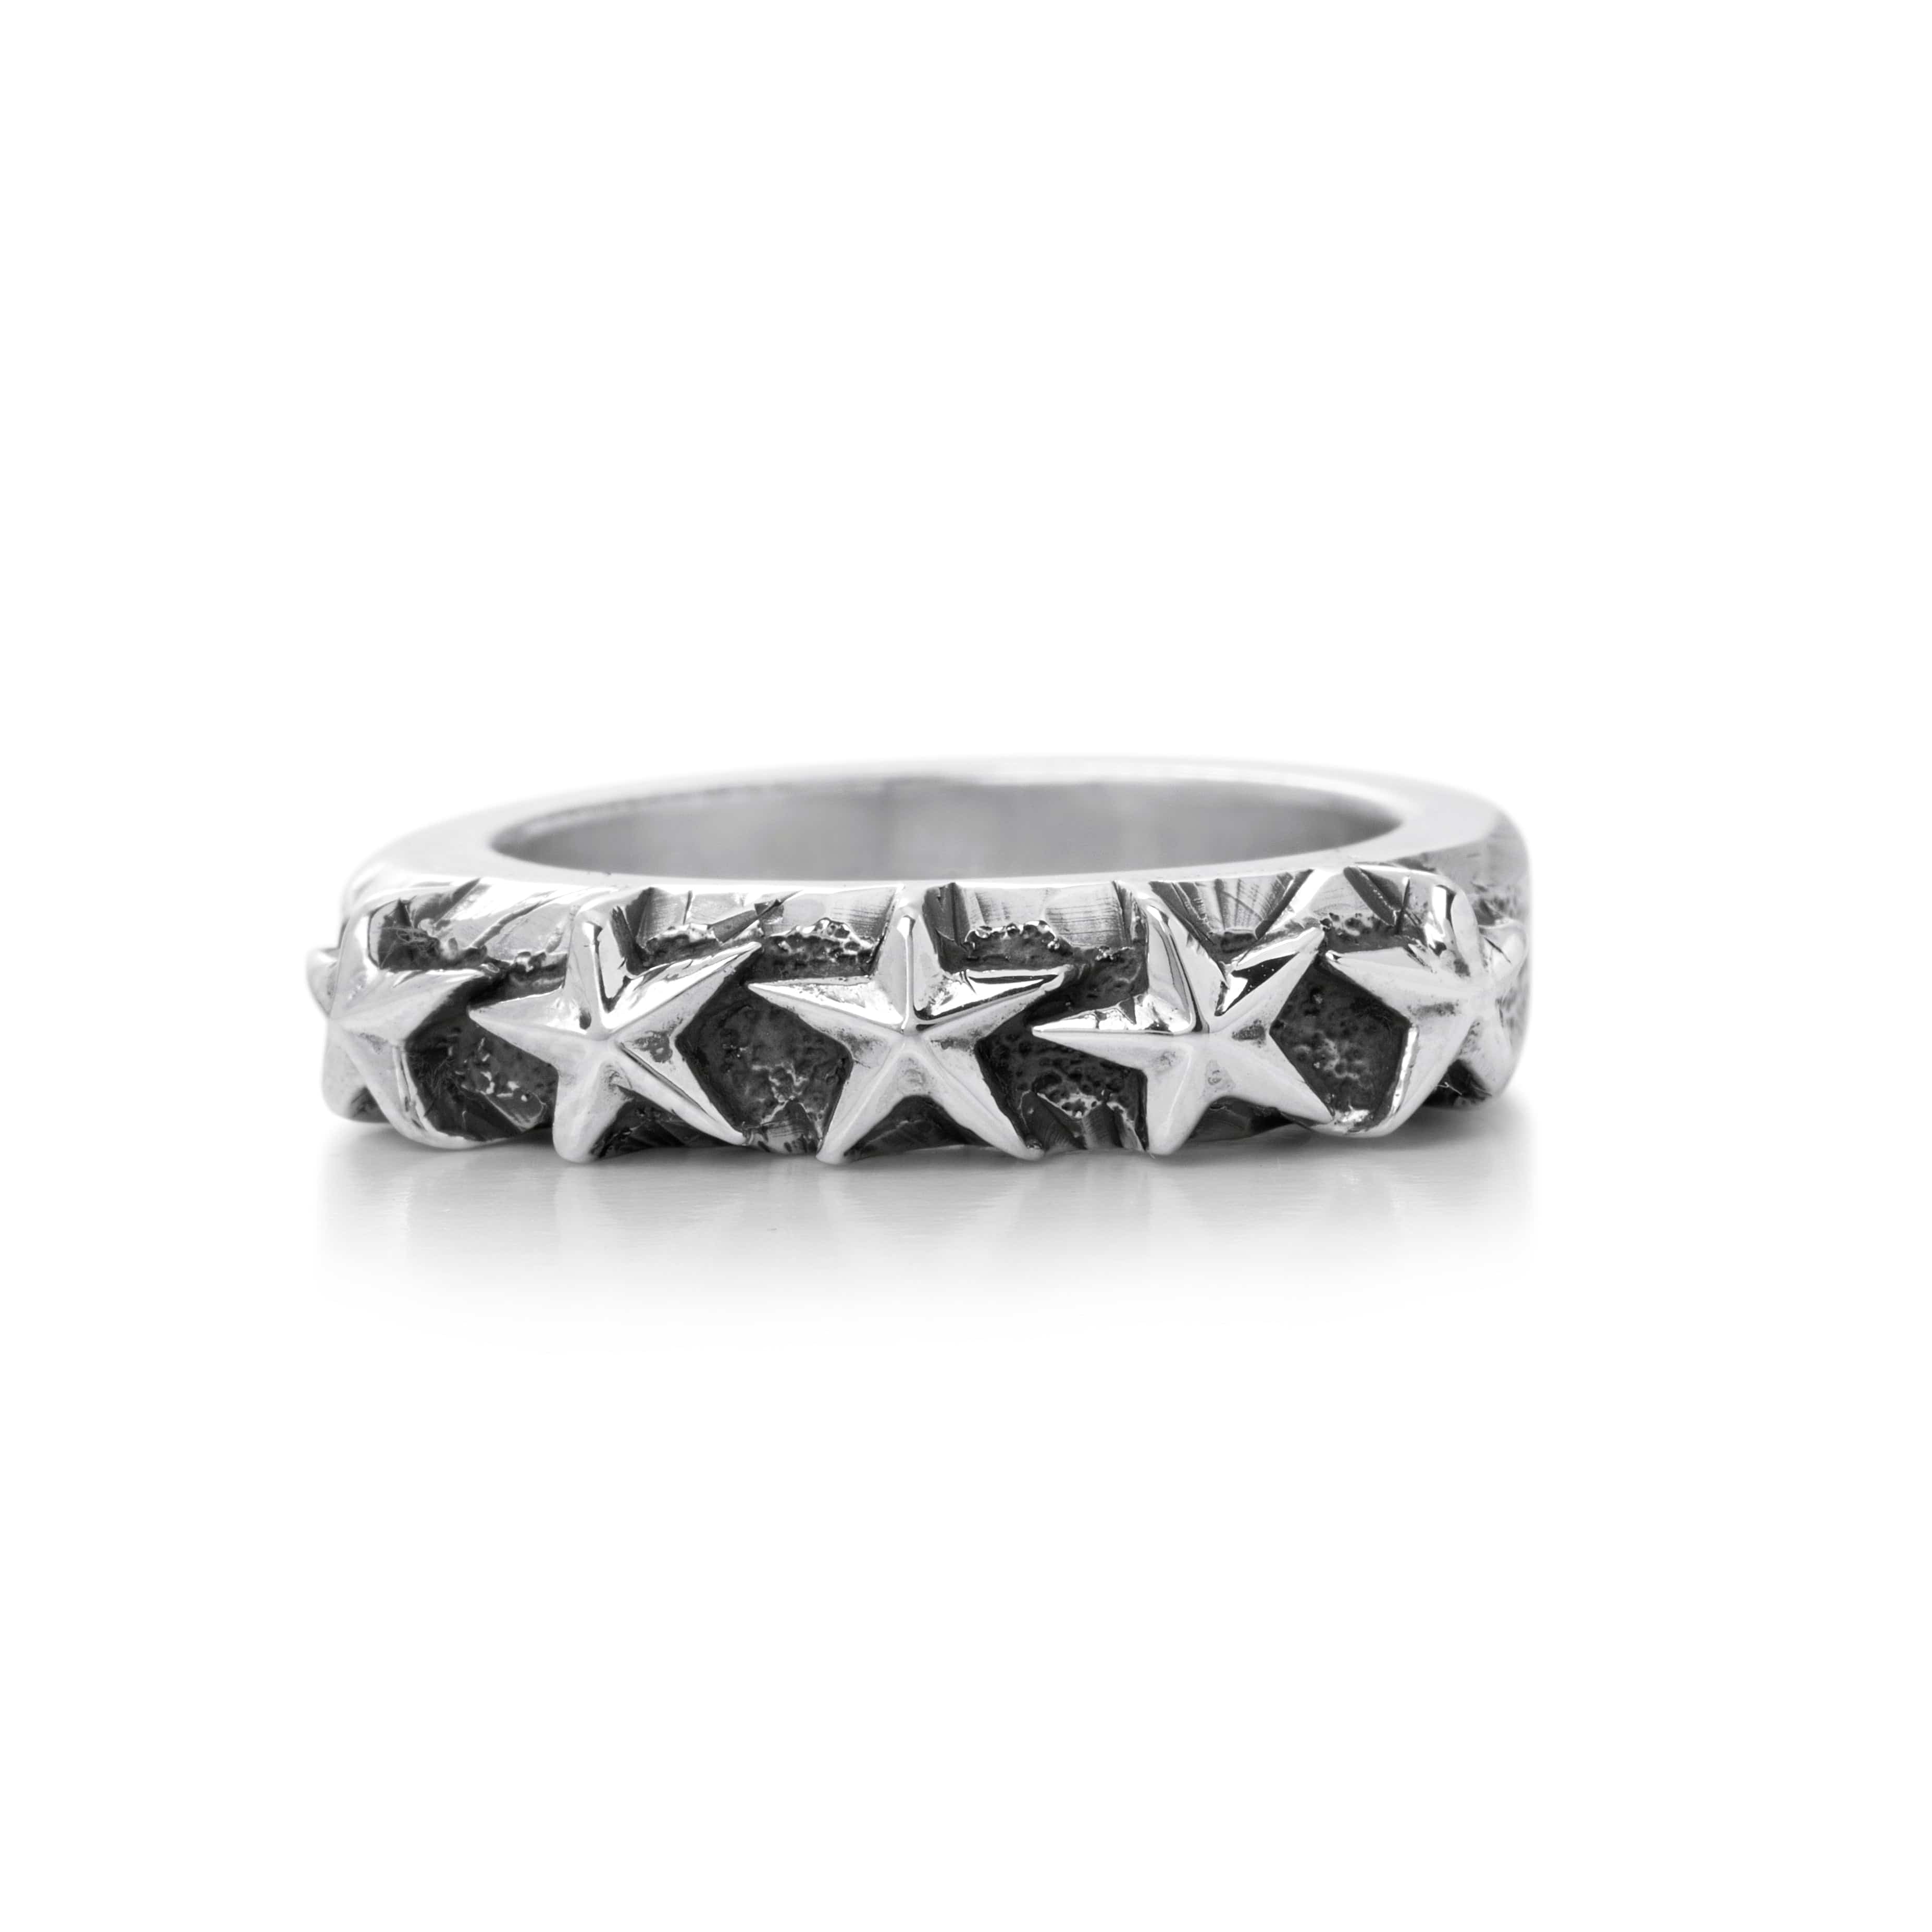 Solid Sterling Silver band decorated with five stars on the top of the ring, blackening surrounds the stars